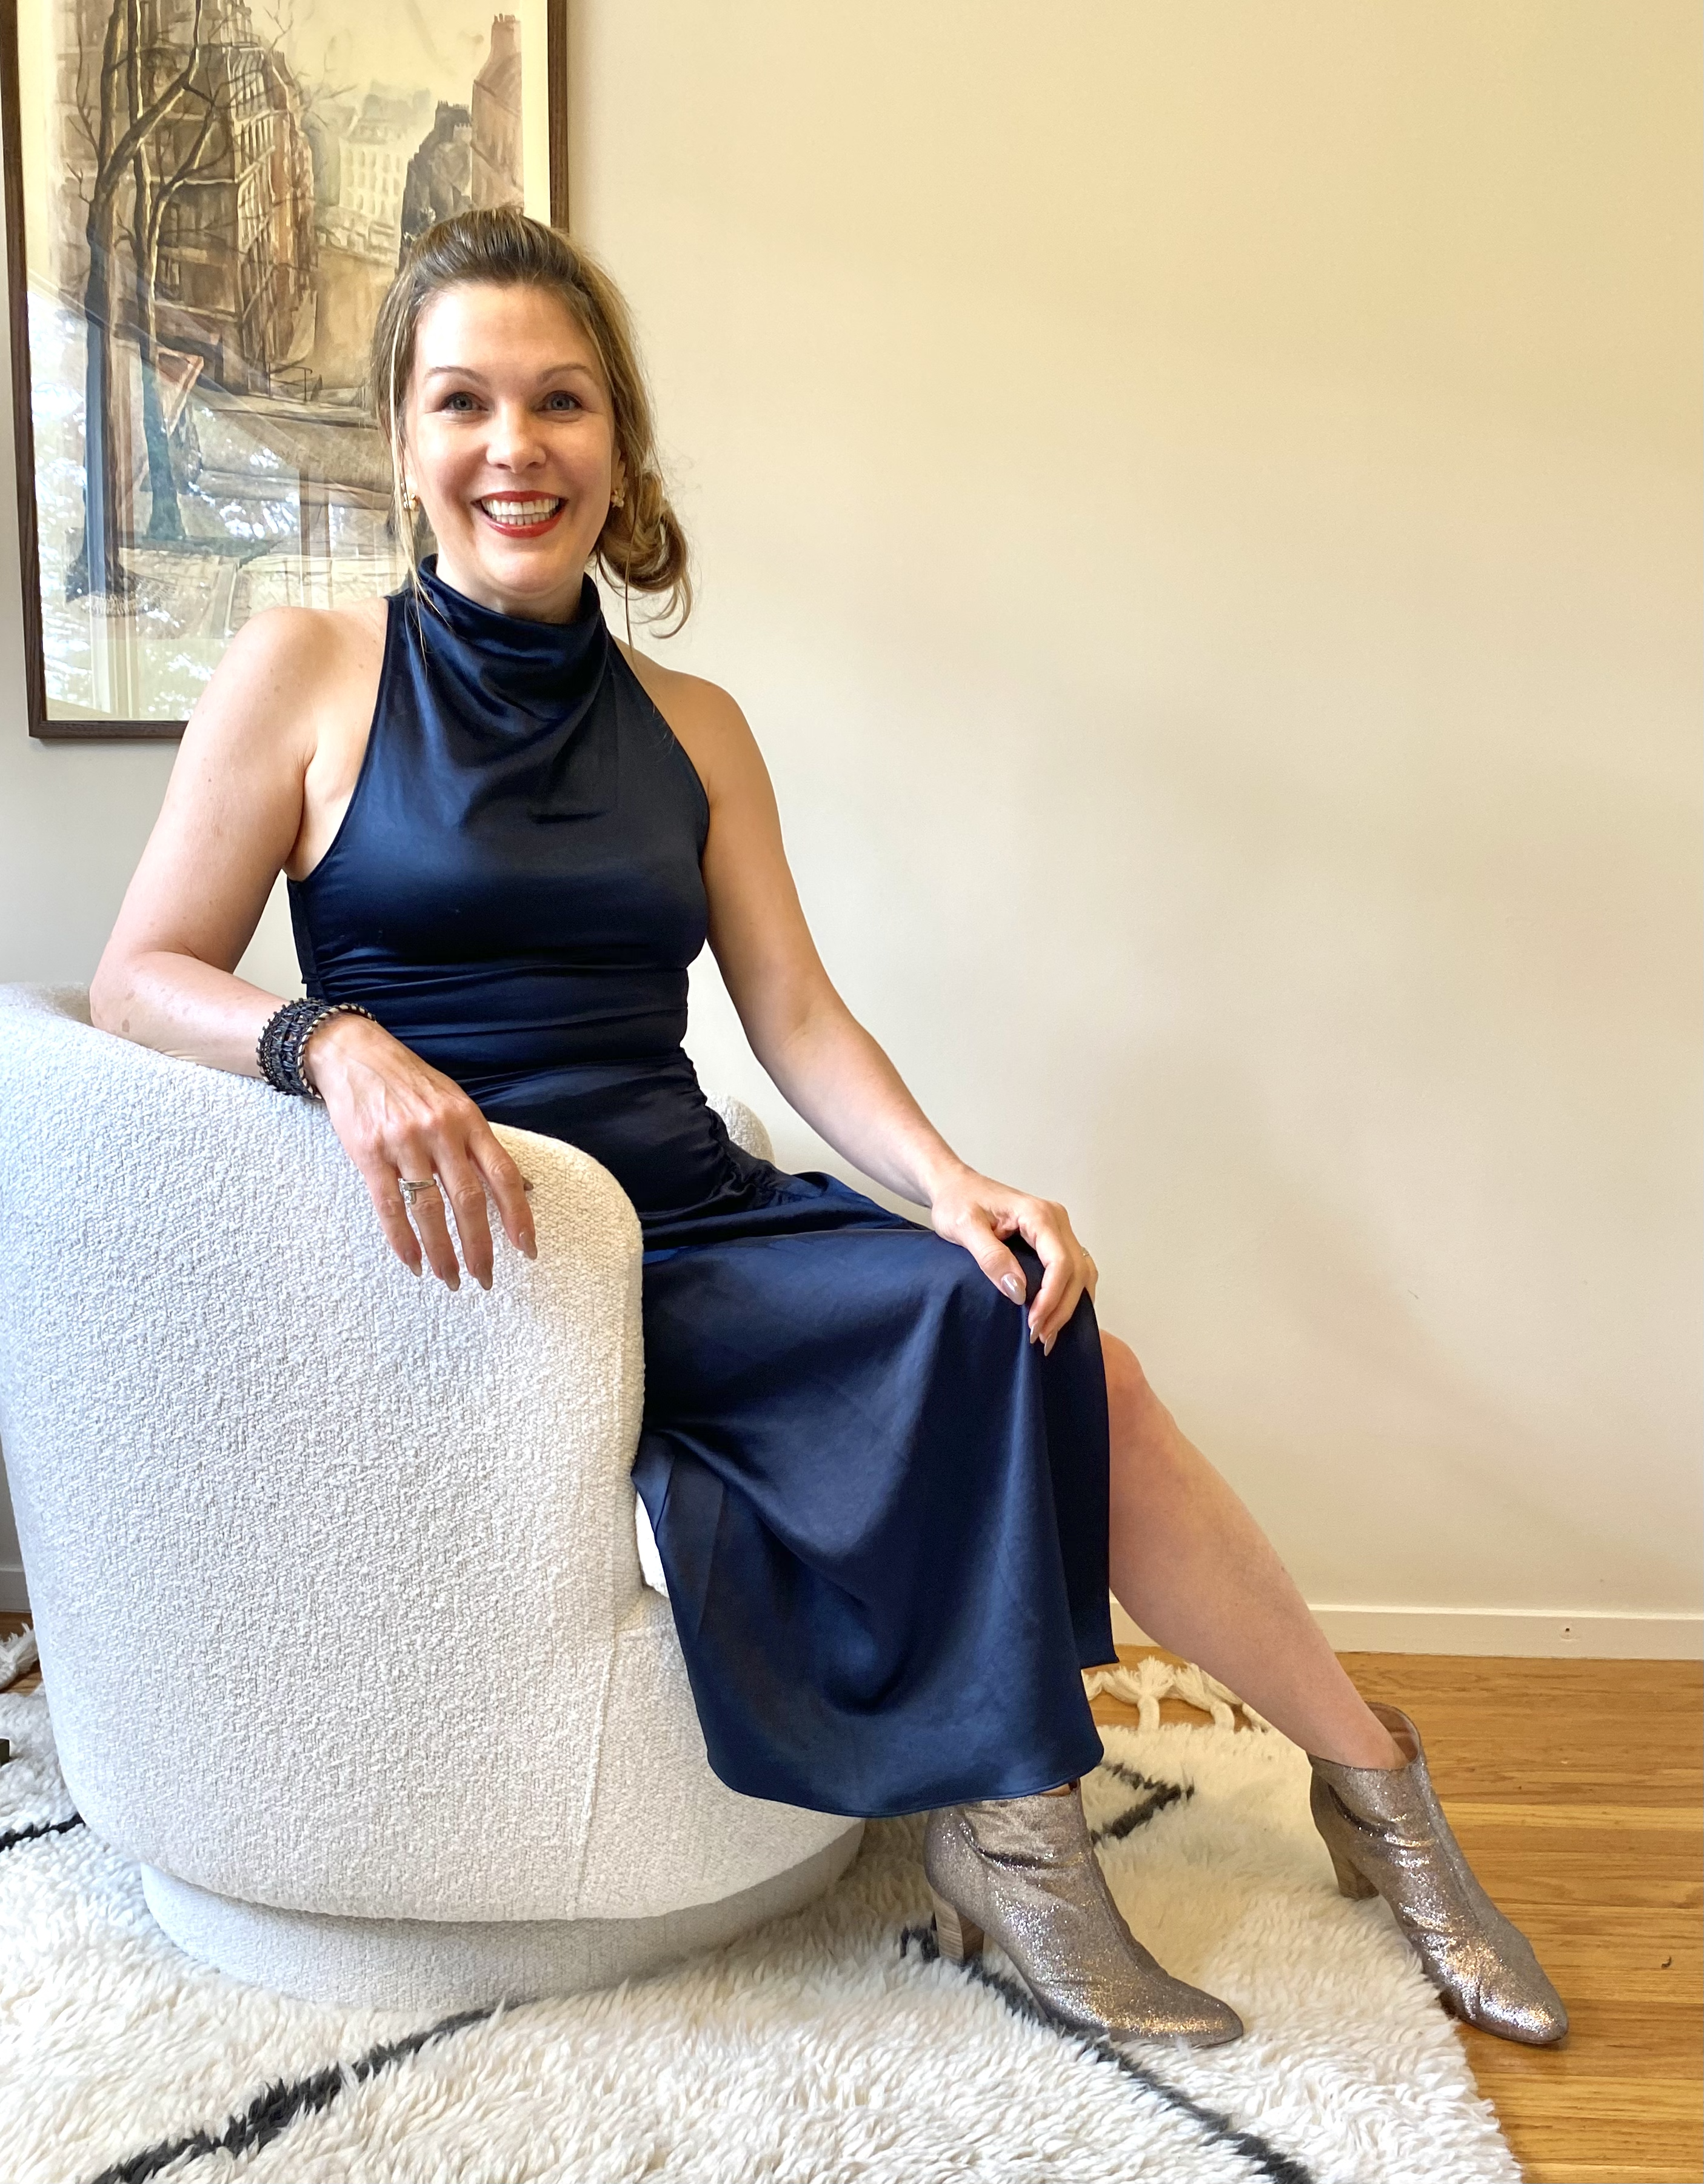 Dr Backos in a blue dress, sitting on a chair smiling.
